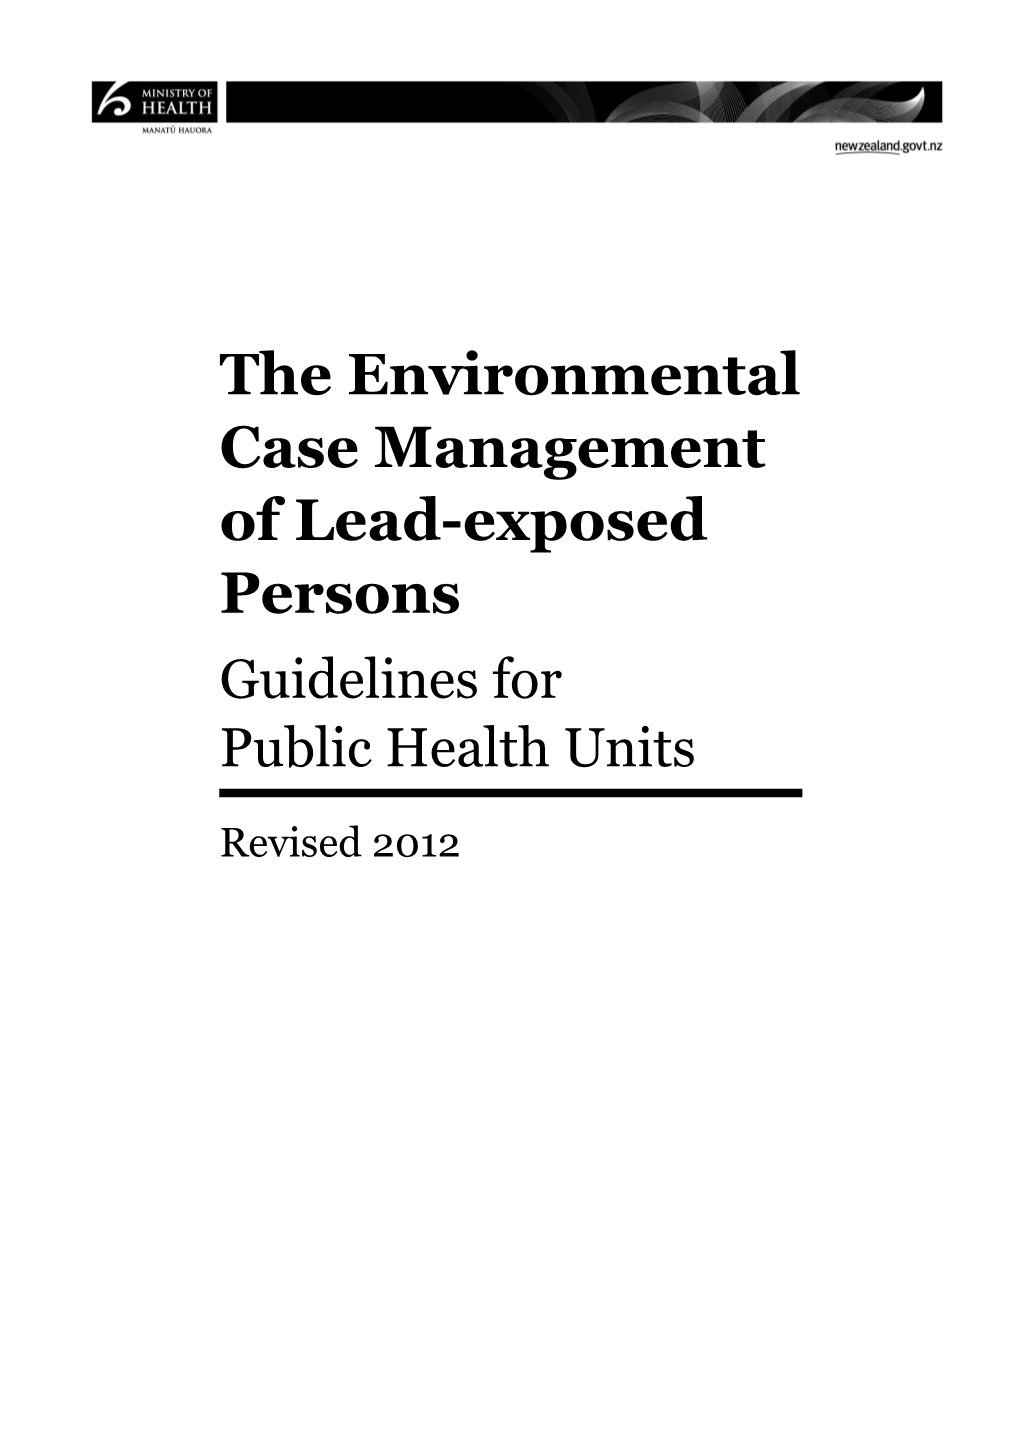 The Environmental Case Management of Lead-Exposed Persons